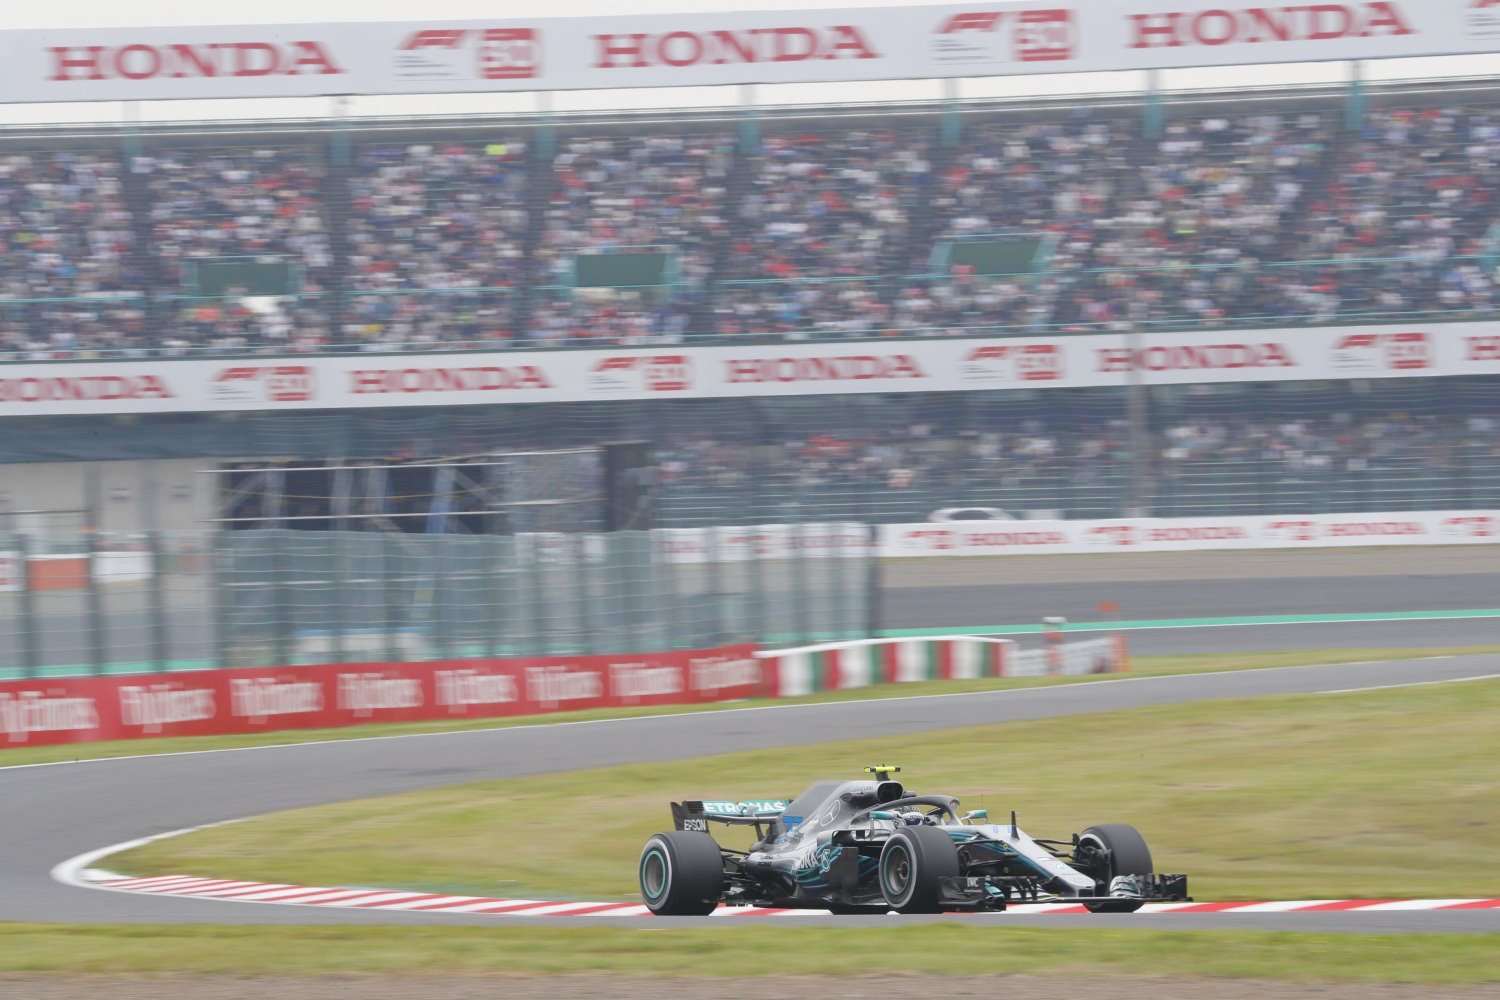 Bottas in the Mercedes at Suzuka Friday. Look at that Friday crowd